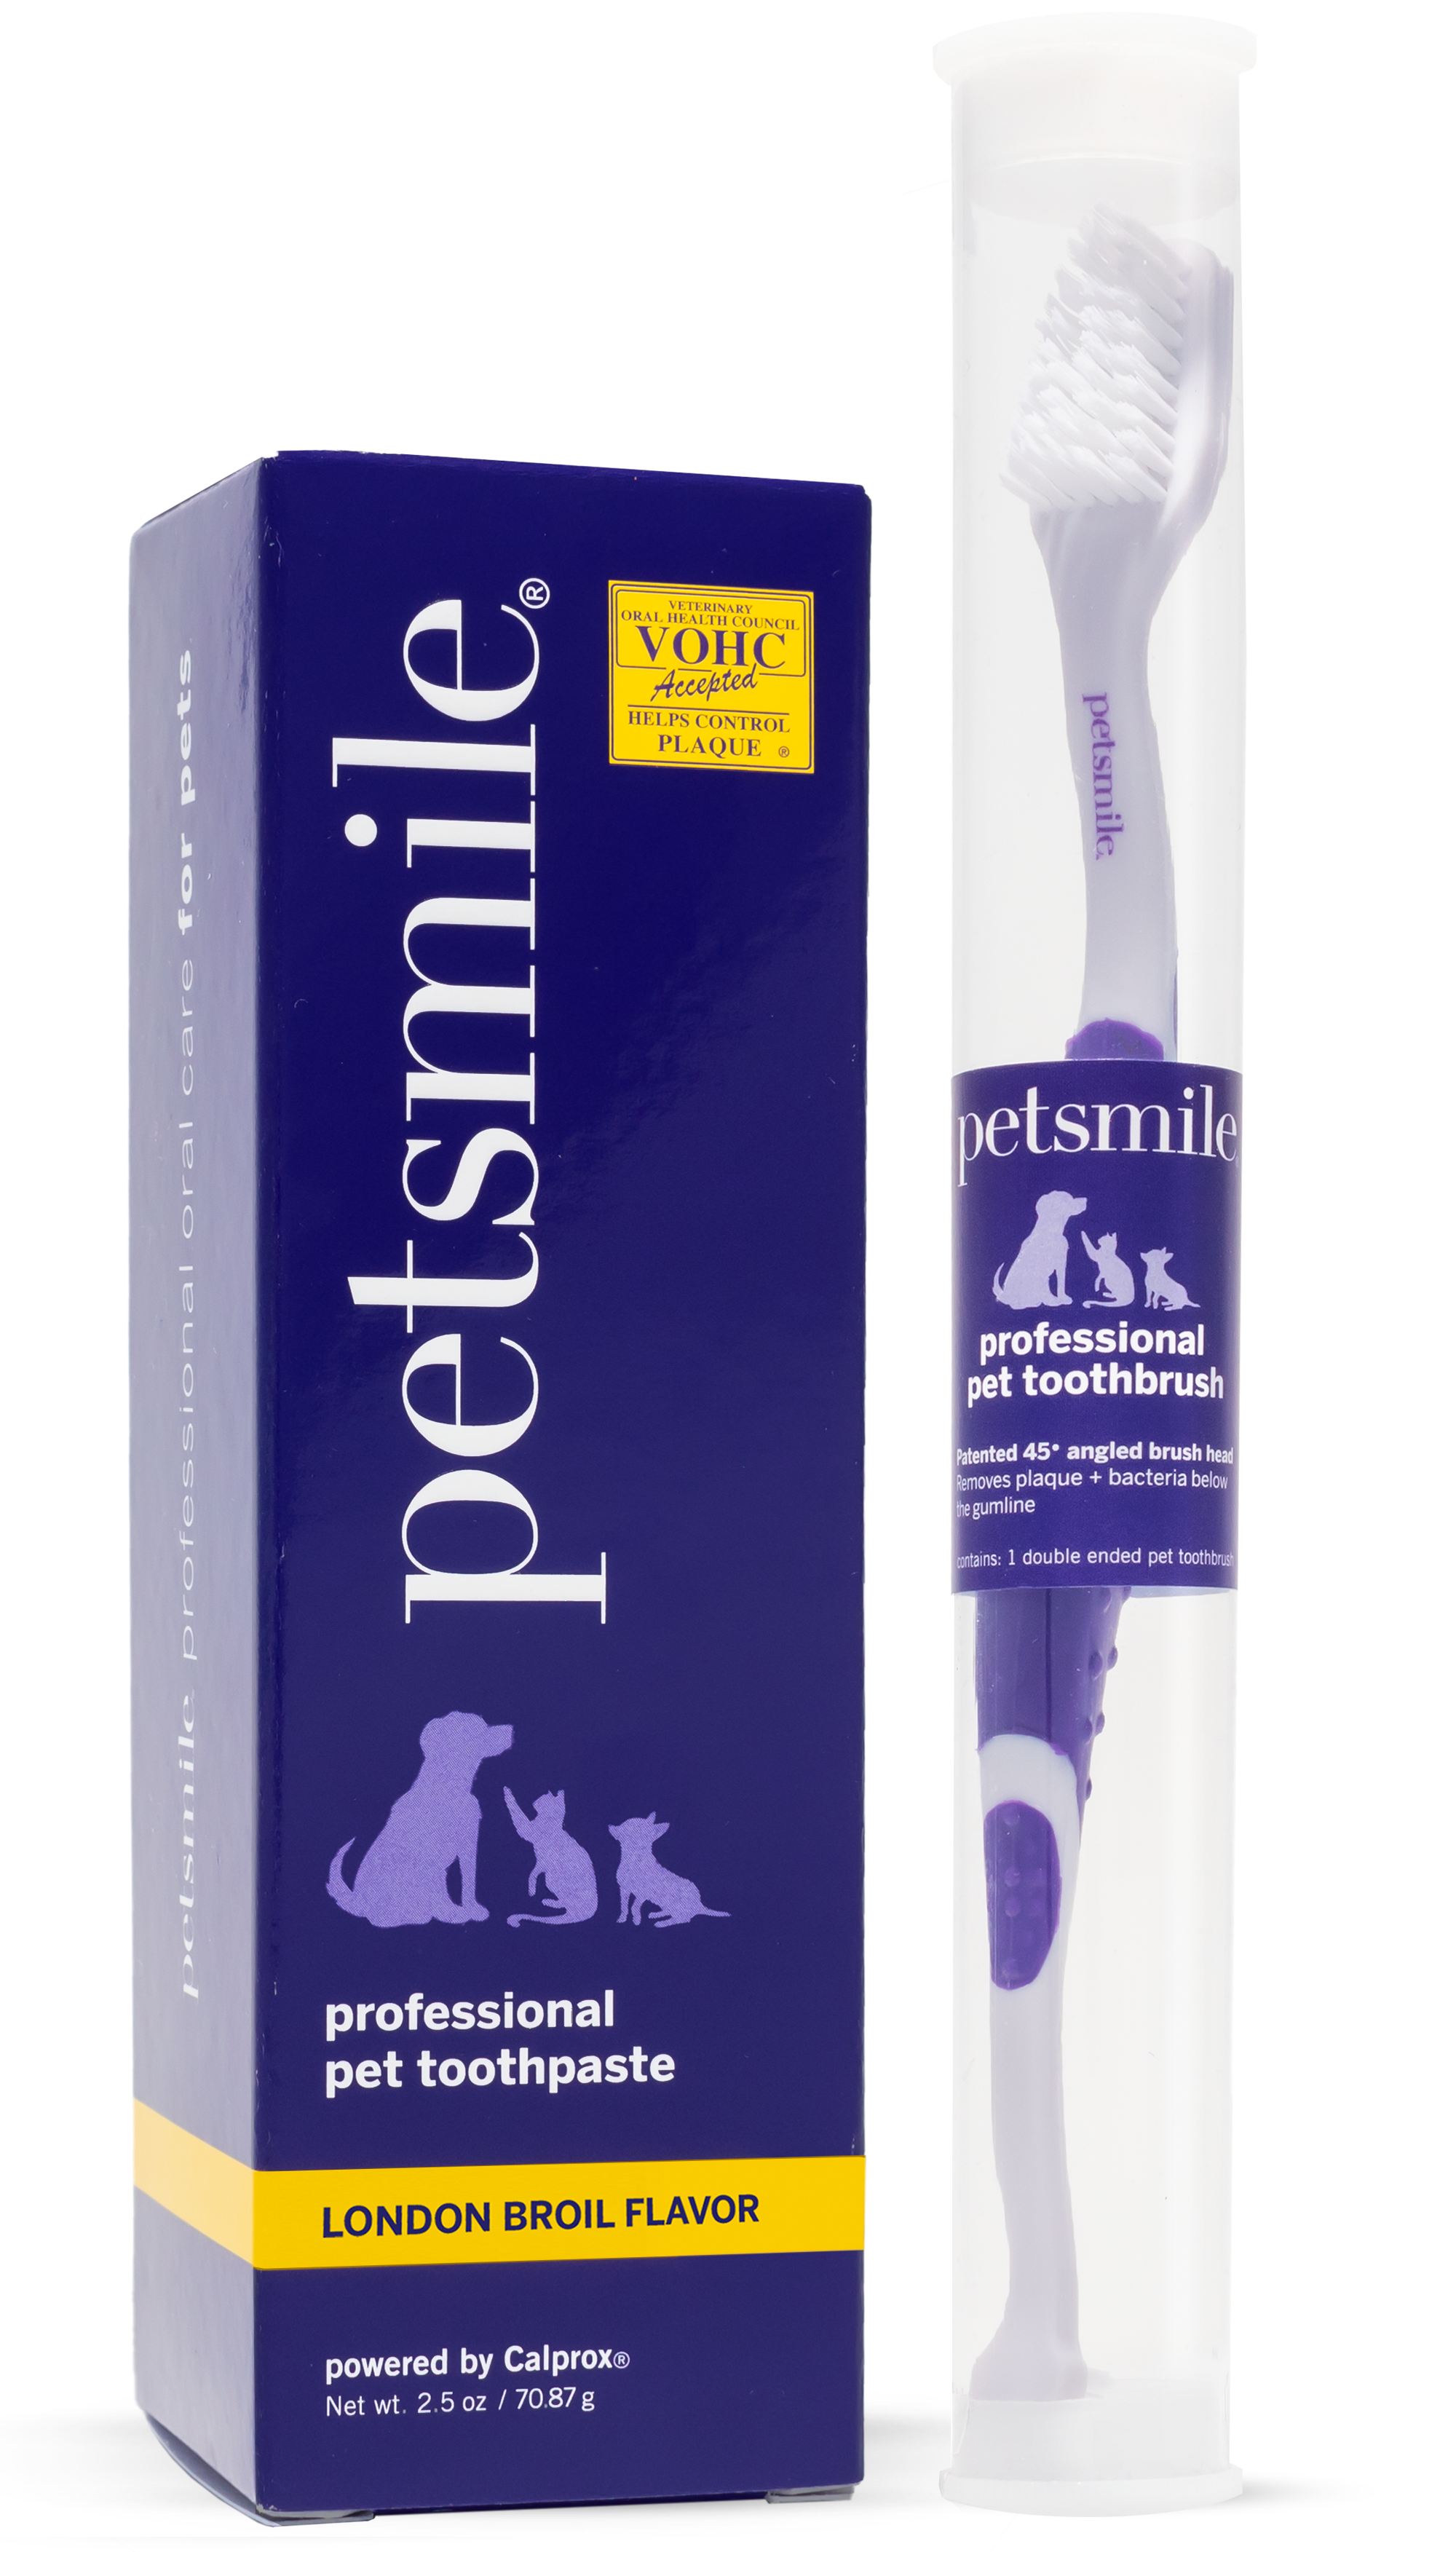 Proven dental care for cats , Professional-grade brush and toothpaste combo , Small cat toothbrush and toothpaste in London Broil Flavor , VOHC-approved cat toothpaste in purple bottle , petsmile dental care for professional results